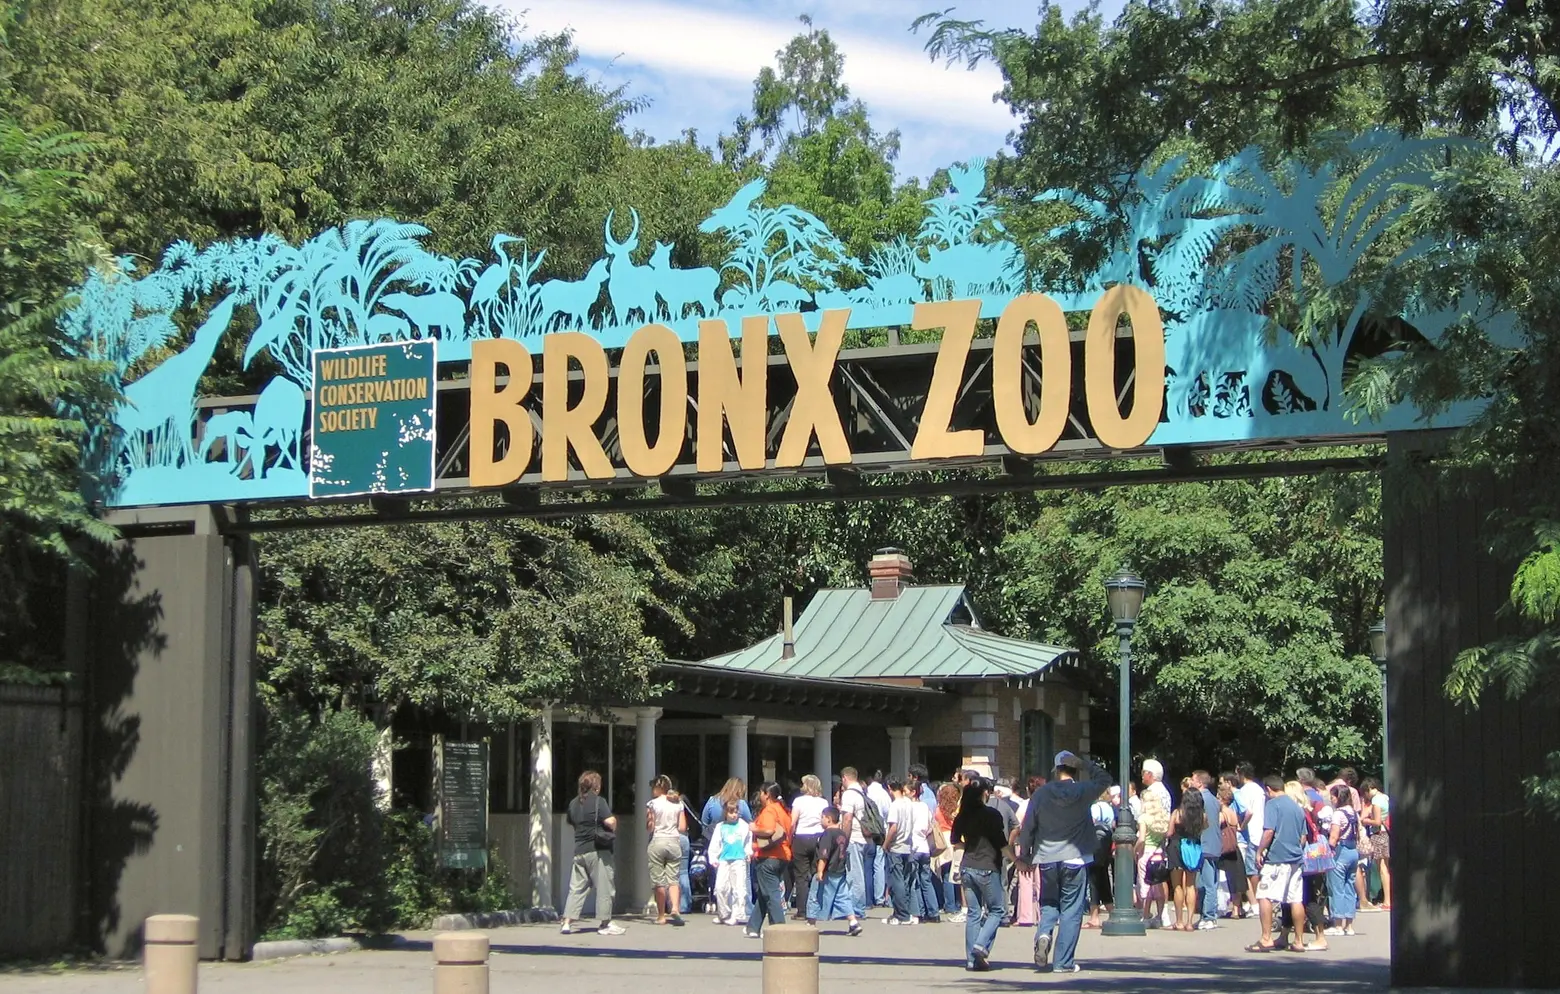 Live a block from the Bronx Zoo for $1,348/month, lottery opening for nine units in Belmont